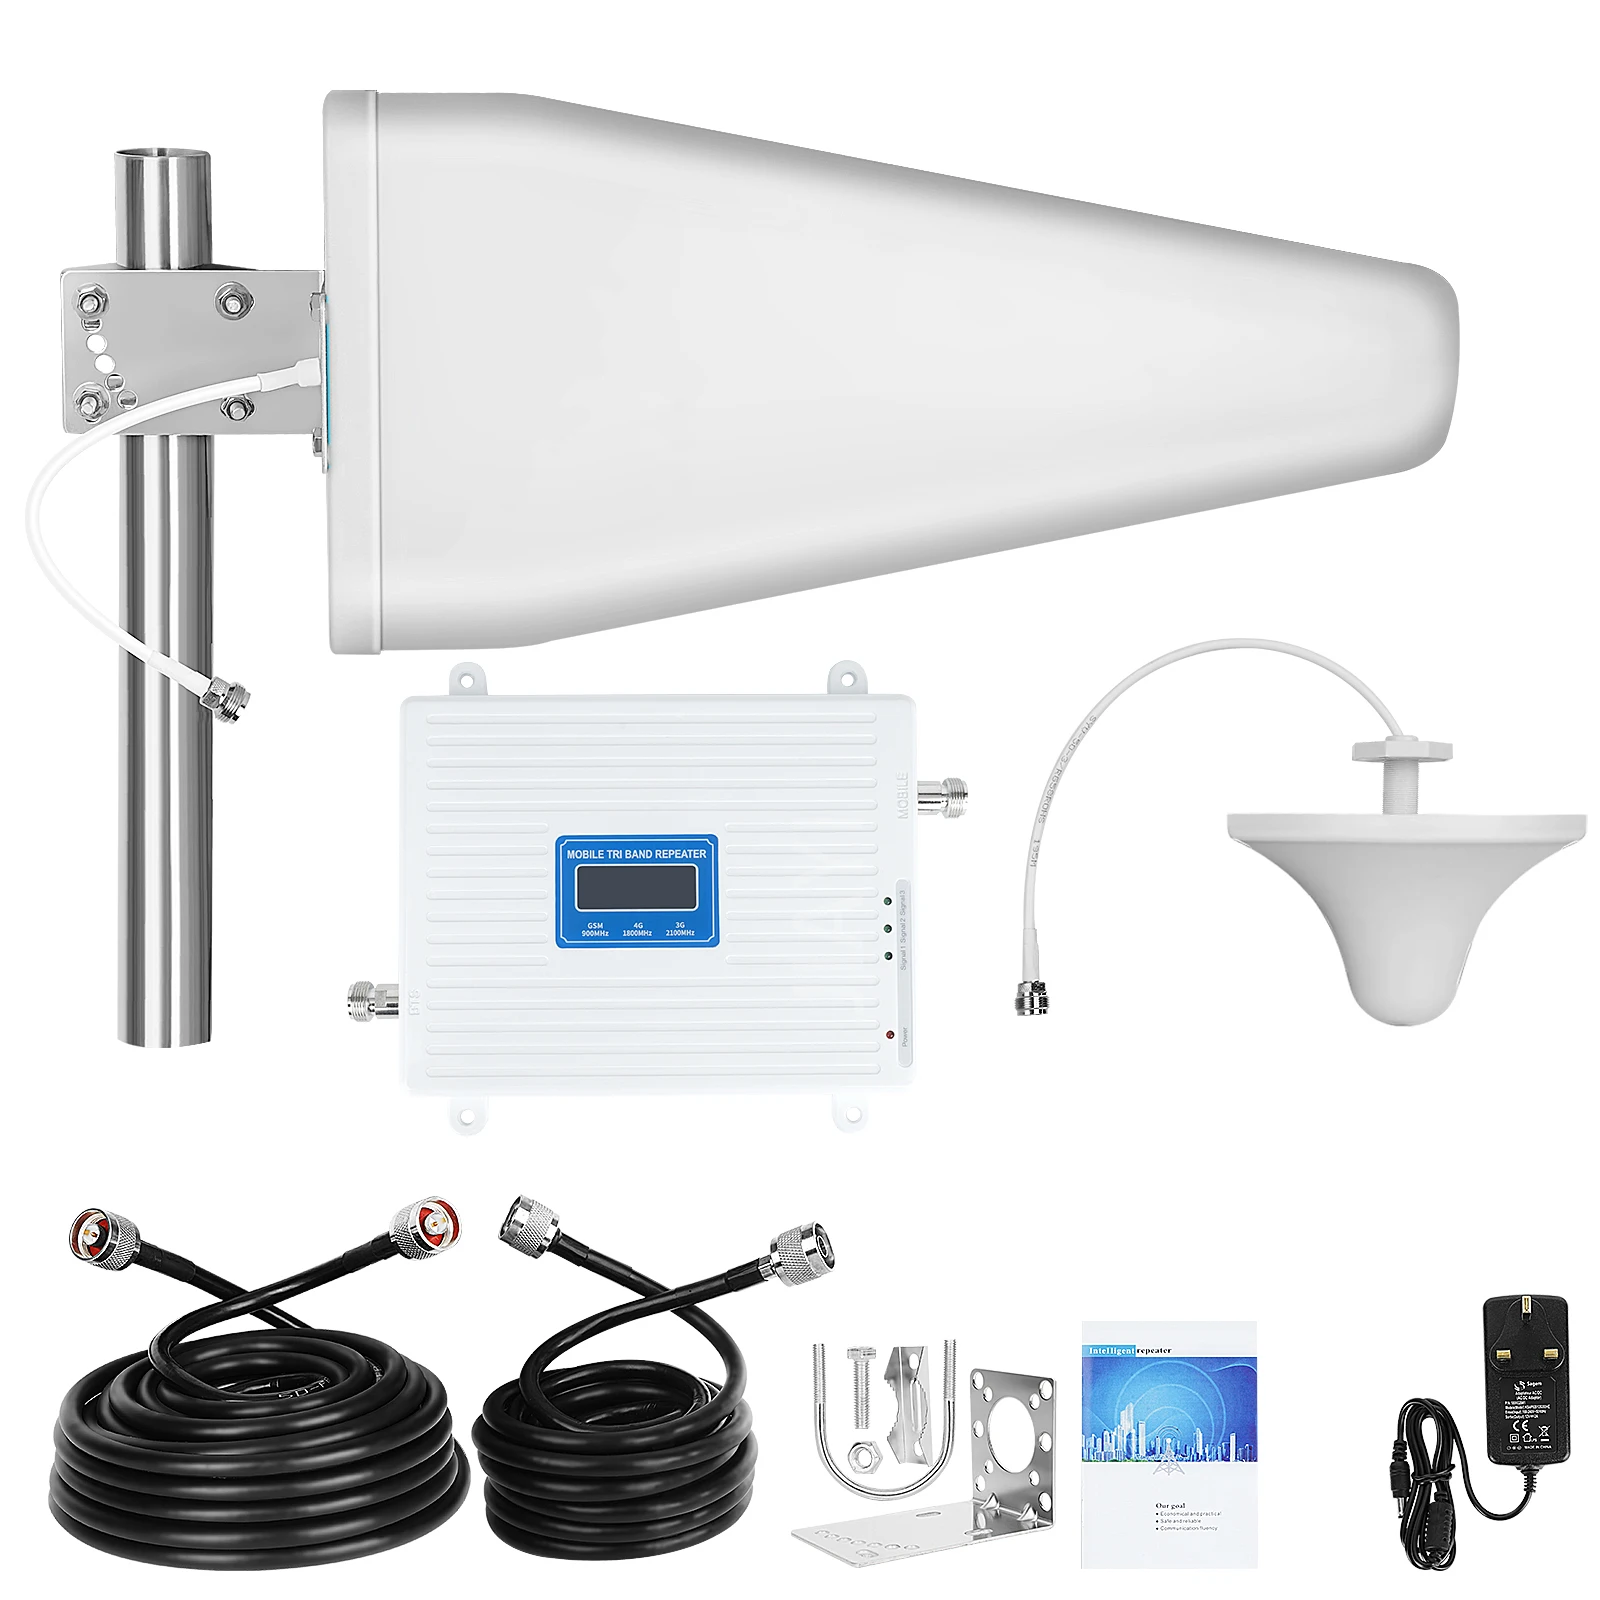 2022 Best-selling Tri-band 2g 3g 4g 5G Mobile Signal Booster 900/1800/2100mhz LTE Repeater for Indoor